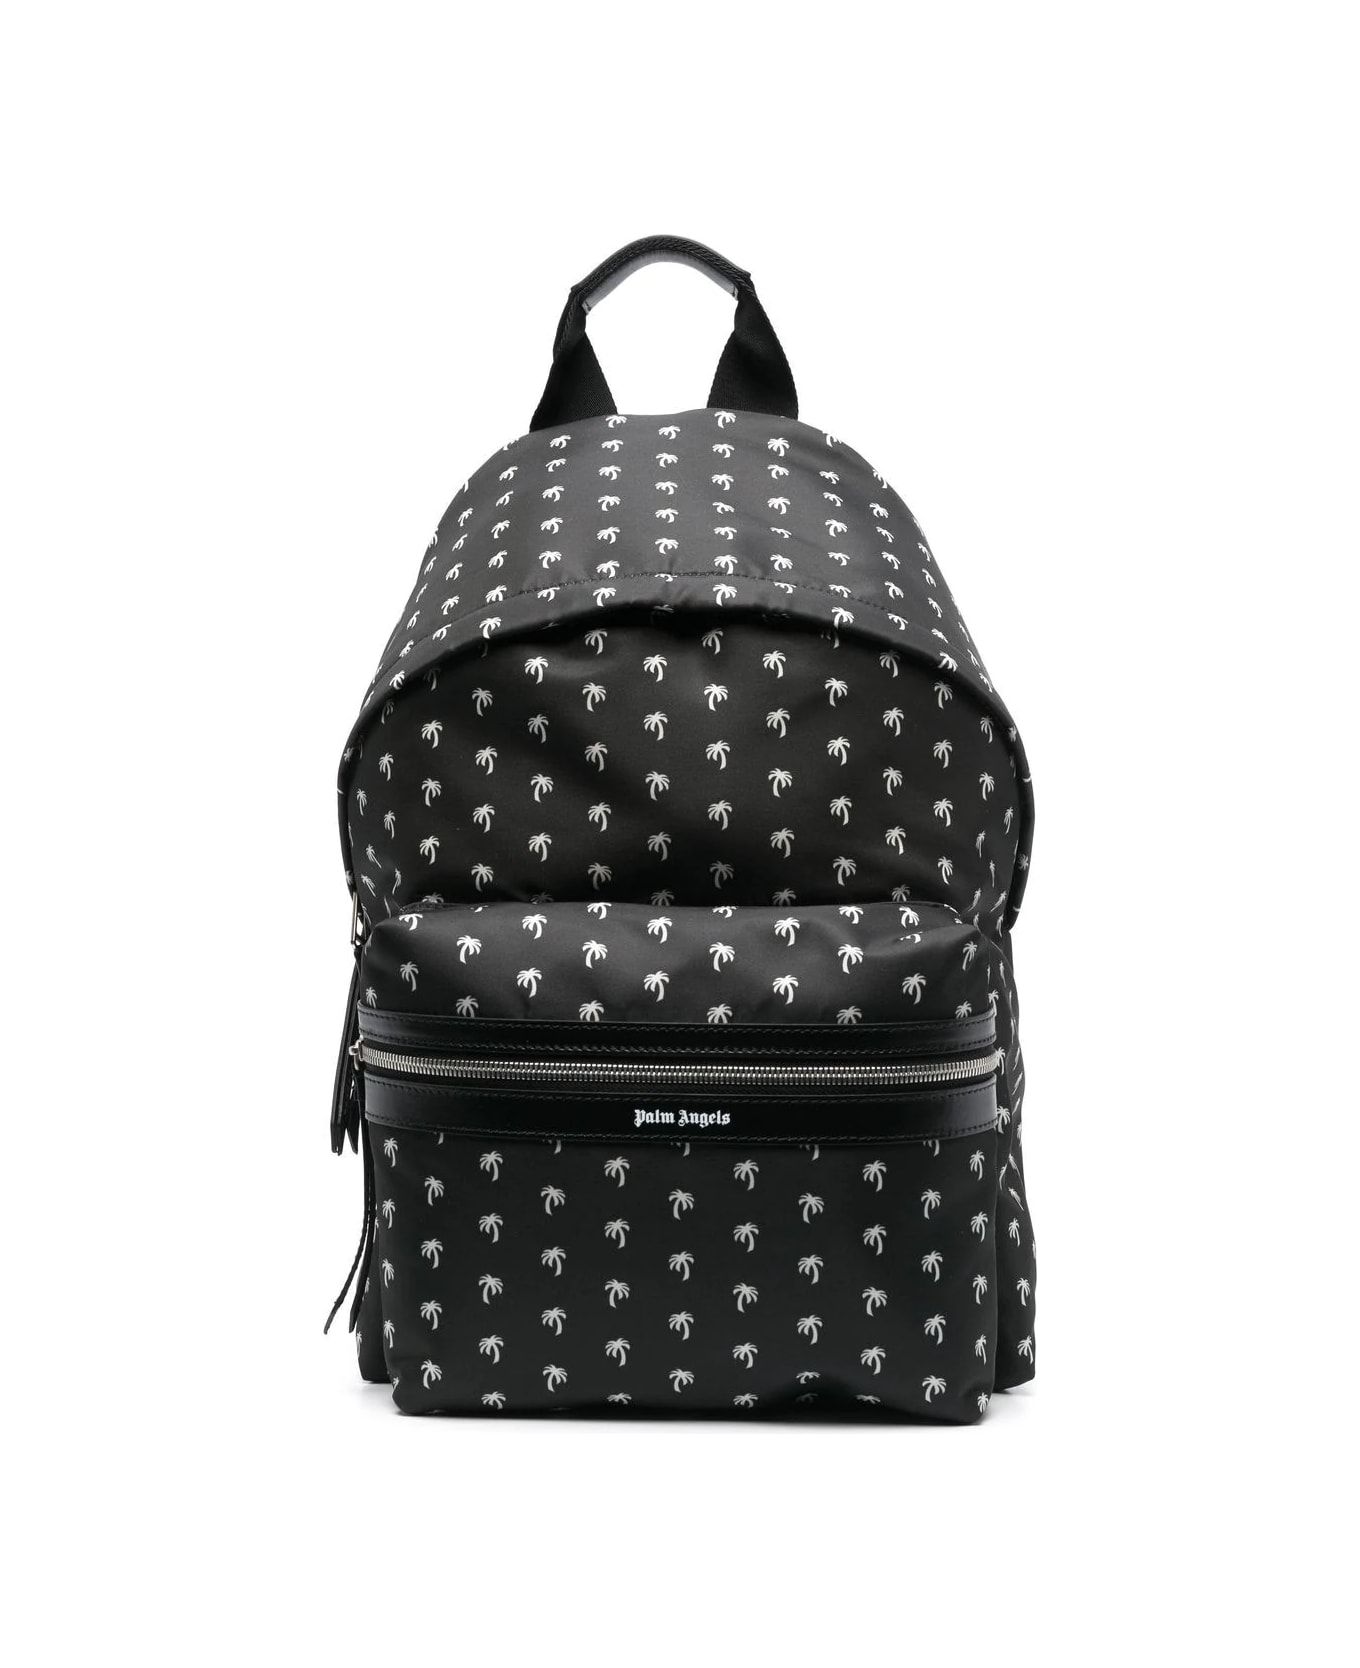 Palm Angels Black Backpack With All-over Mini Palms - Nero